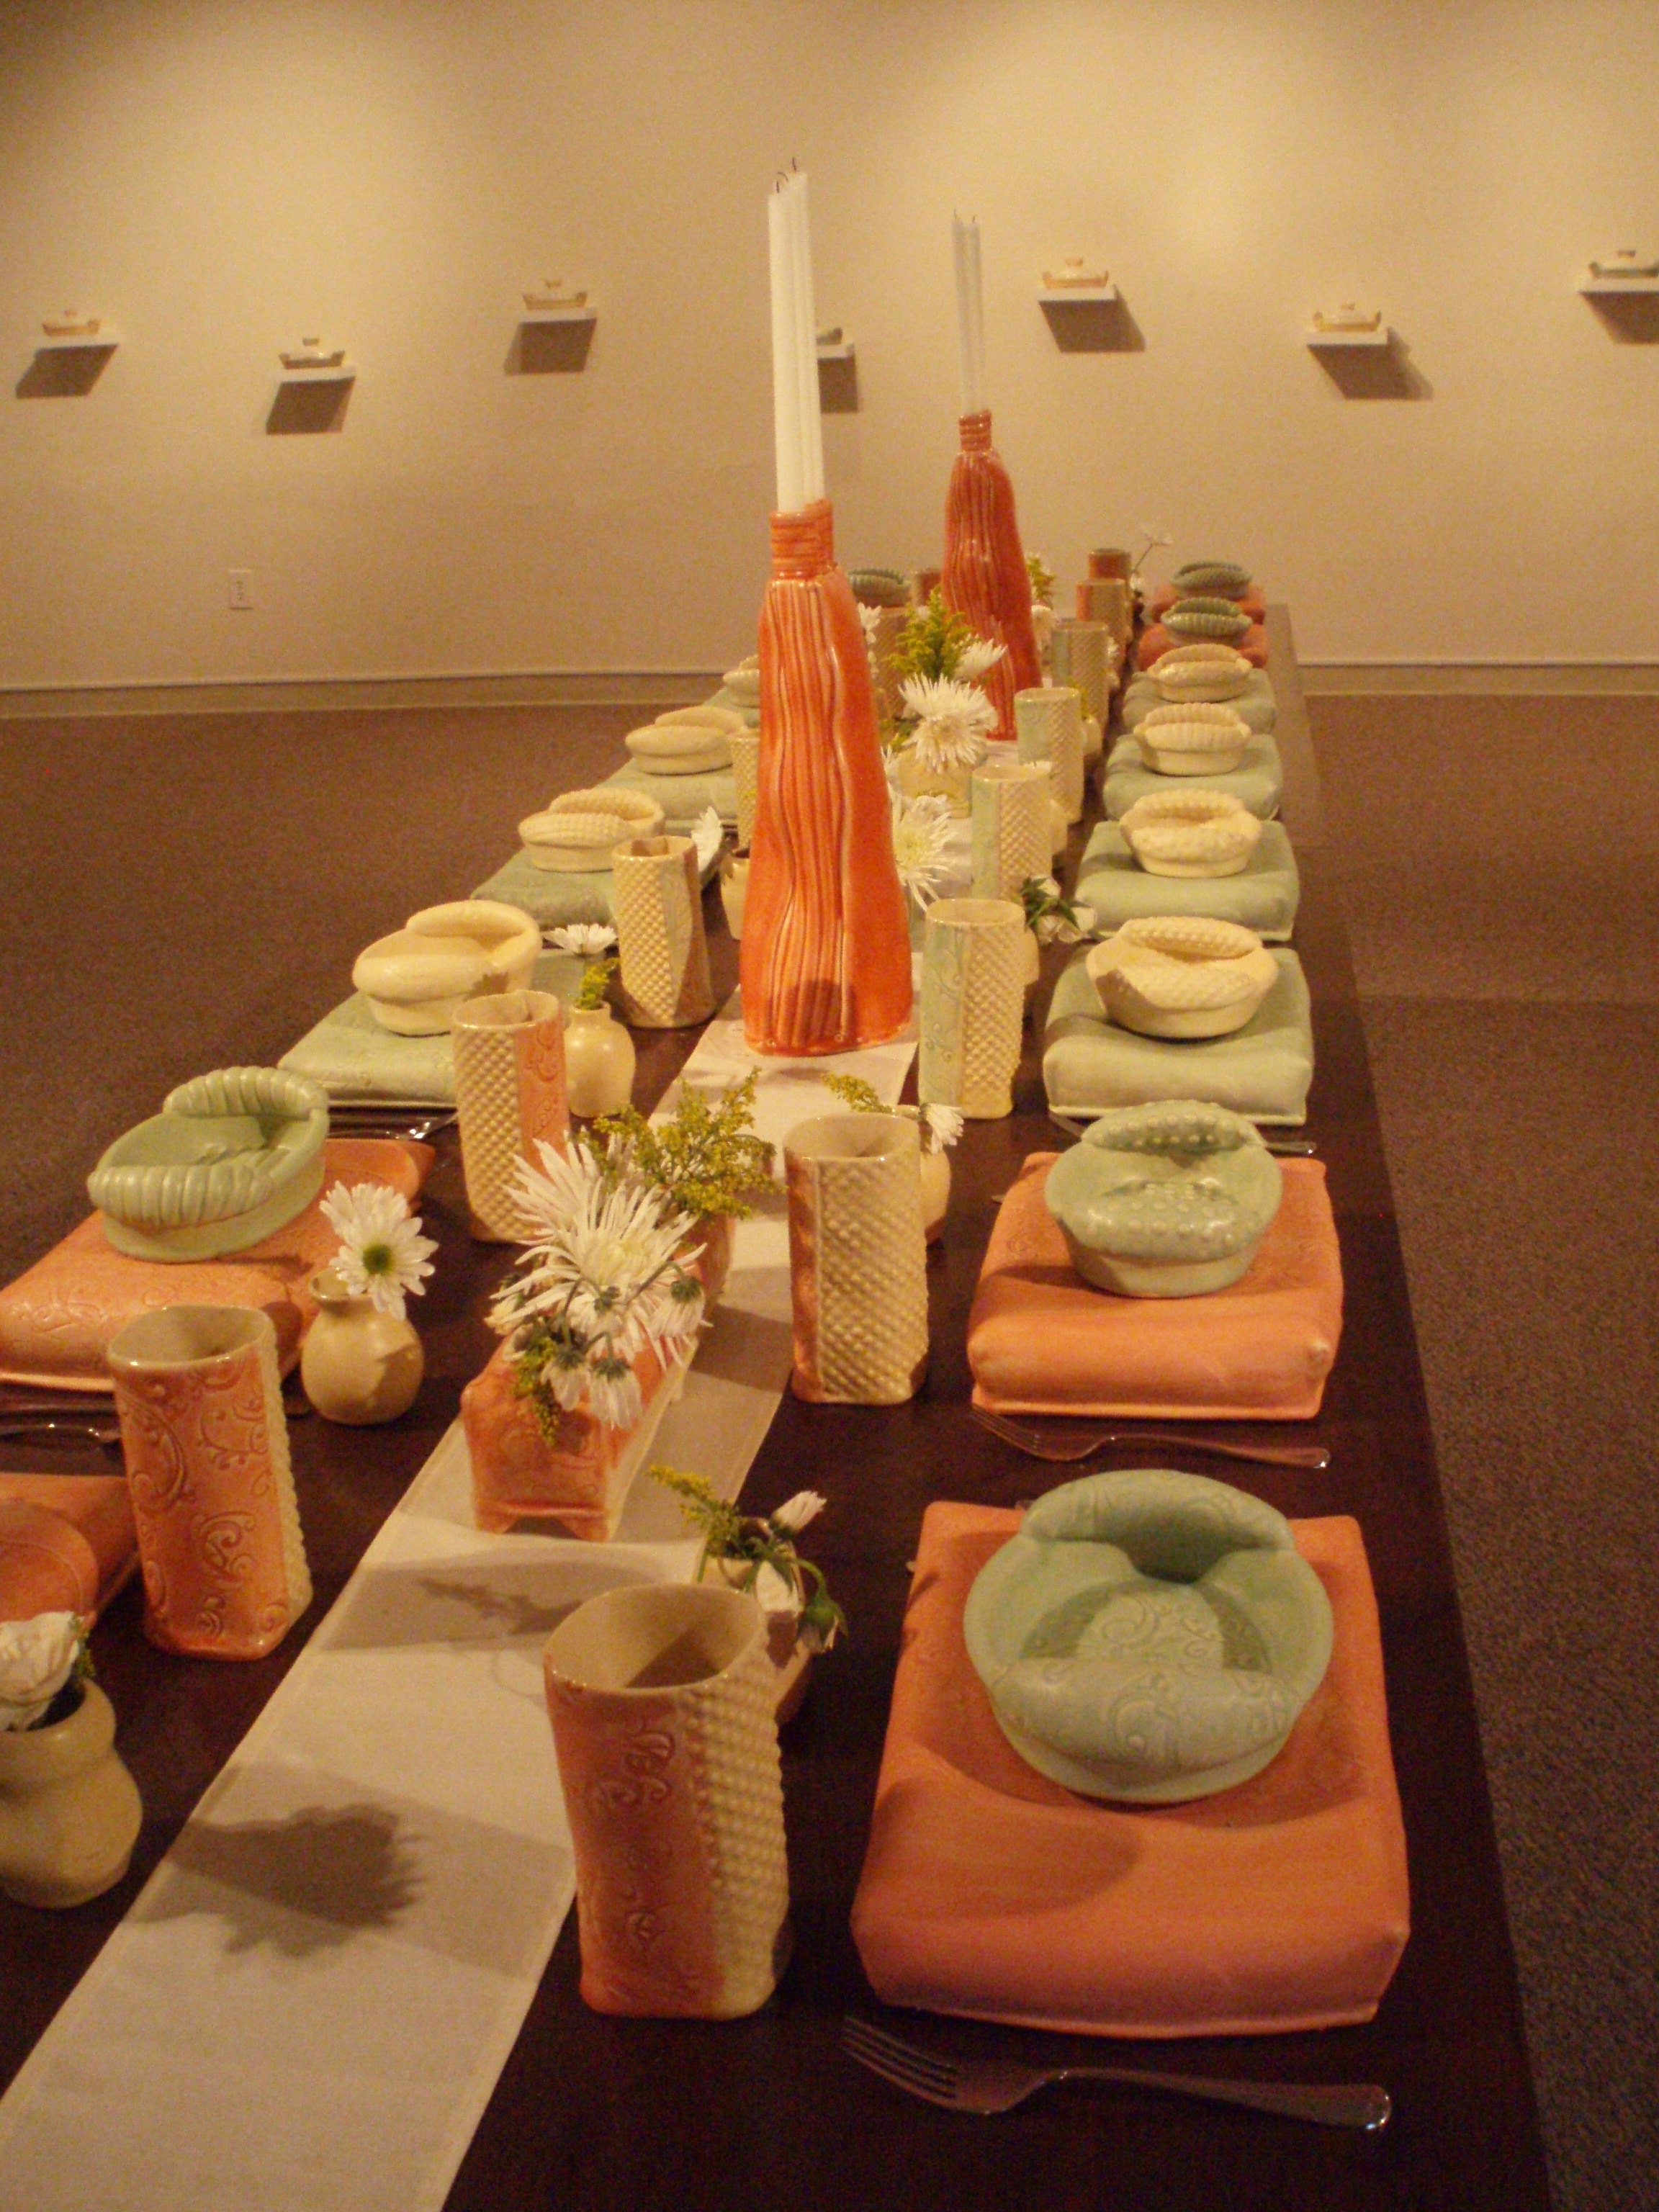 Master's Thesis Exhibition "Invited", 2008